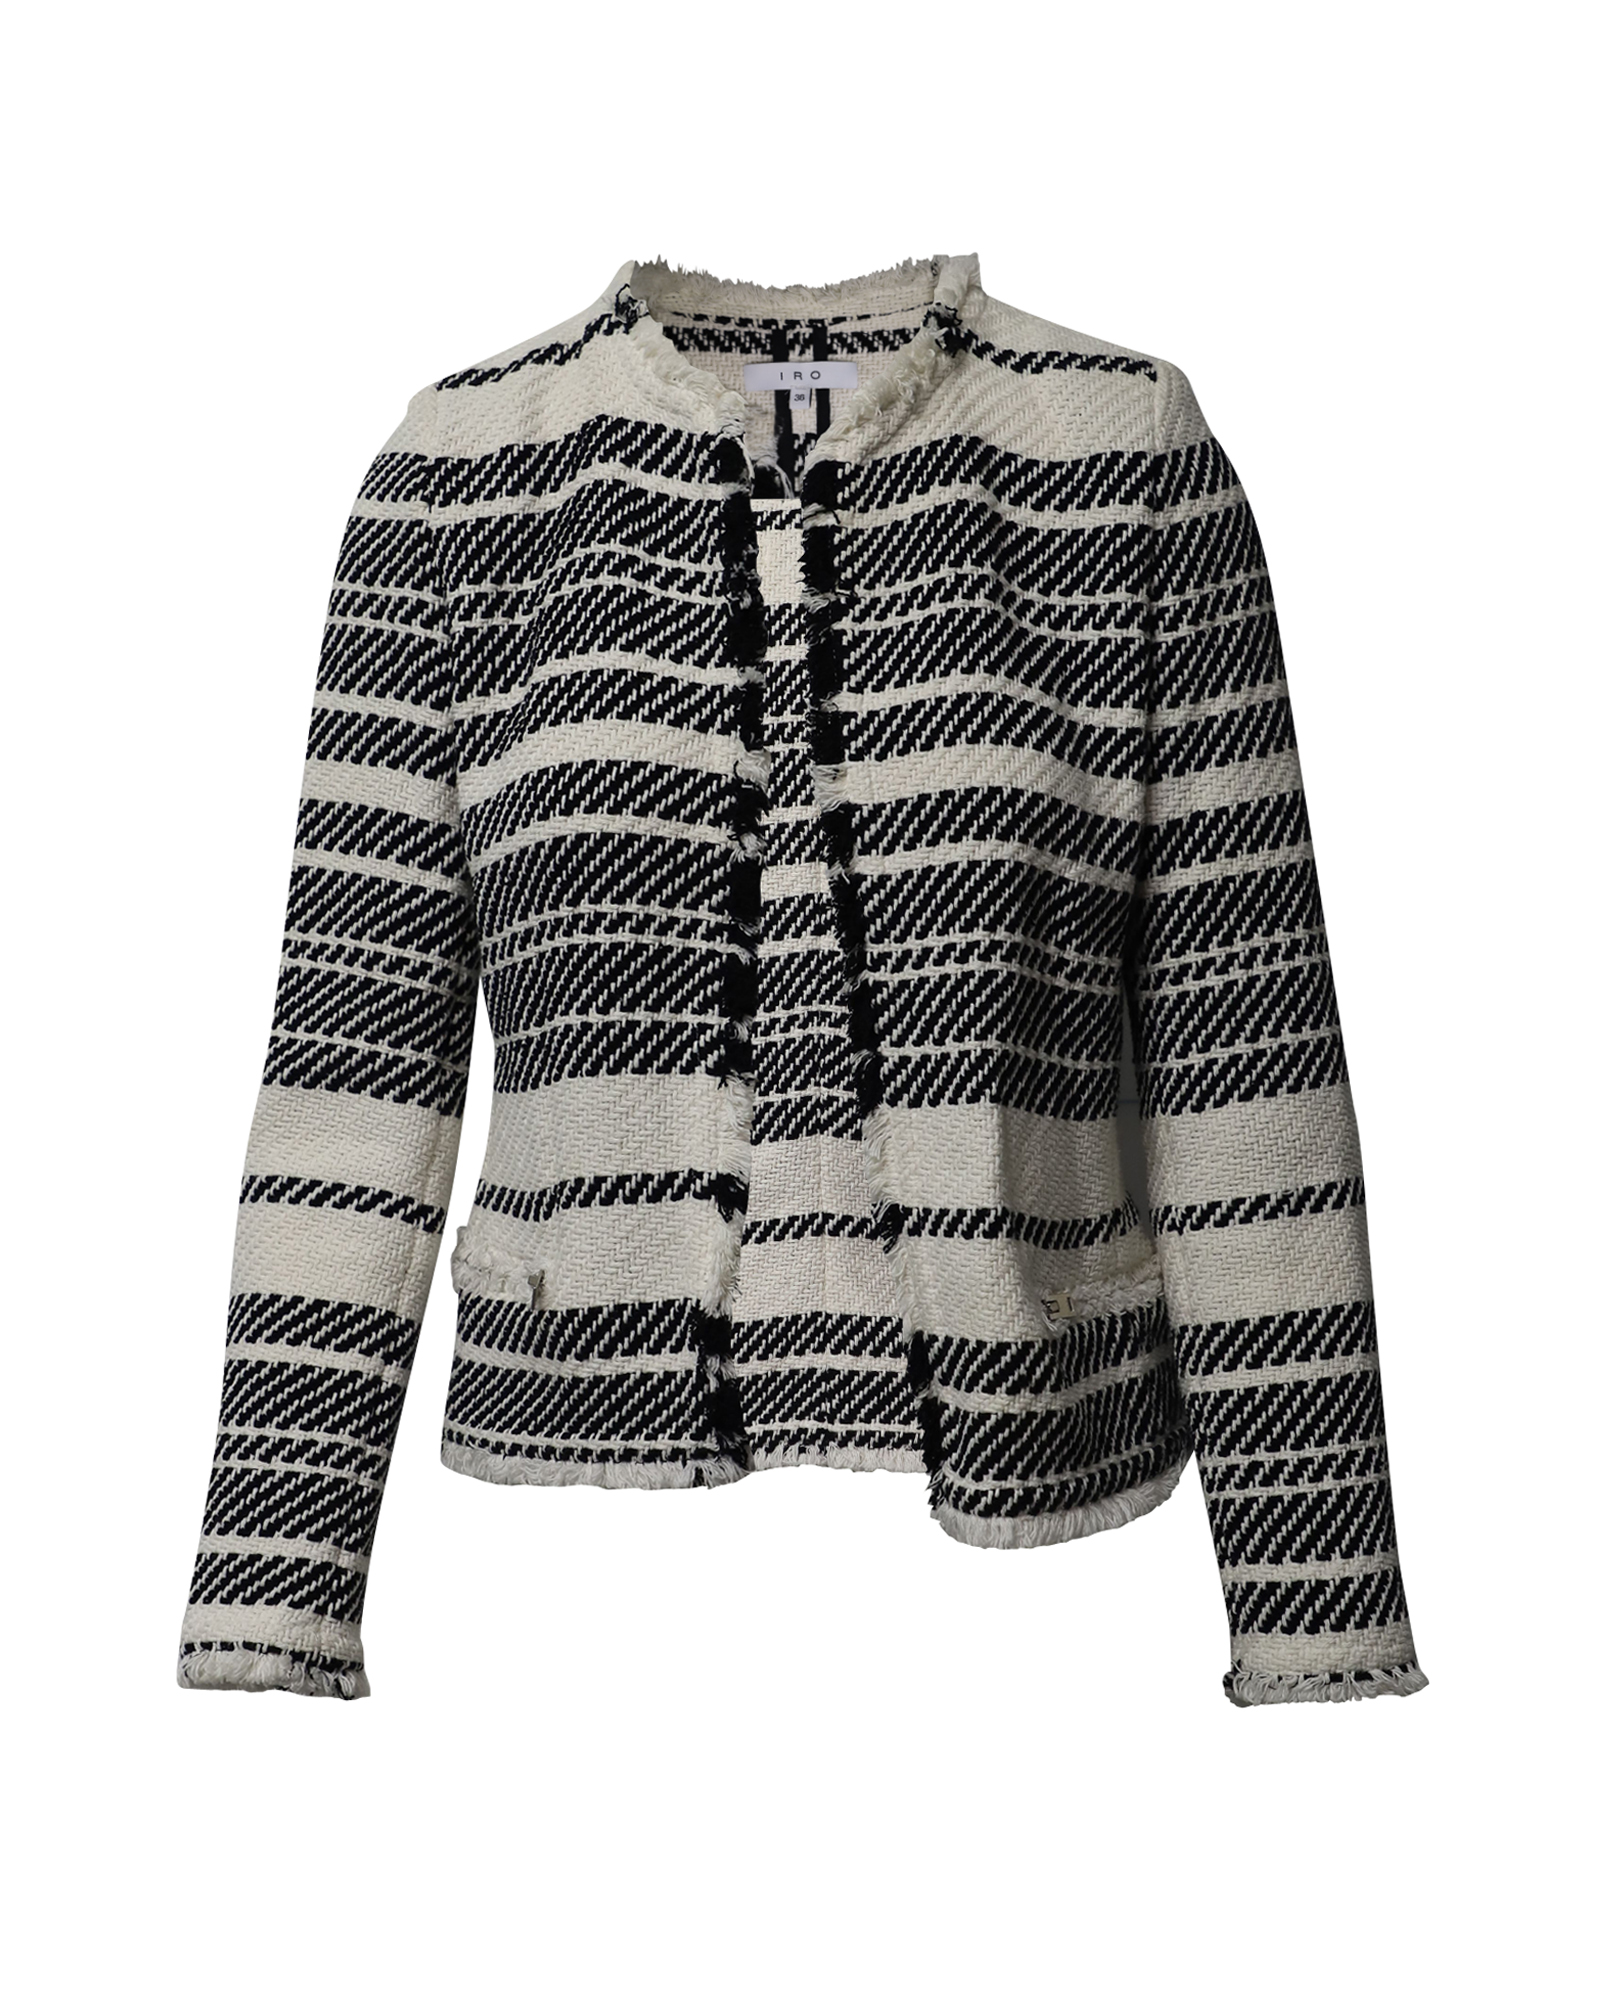 Striped Tweed Jacket in Black and White Cotton